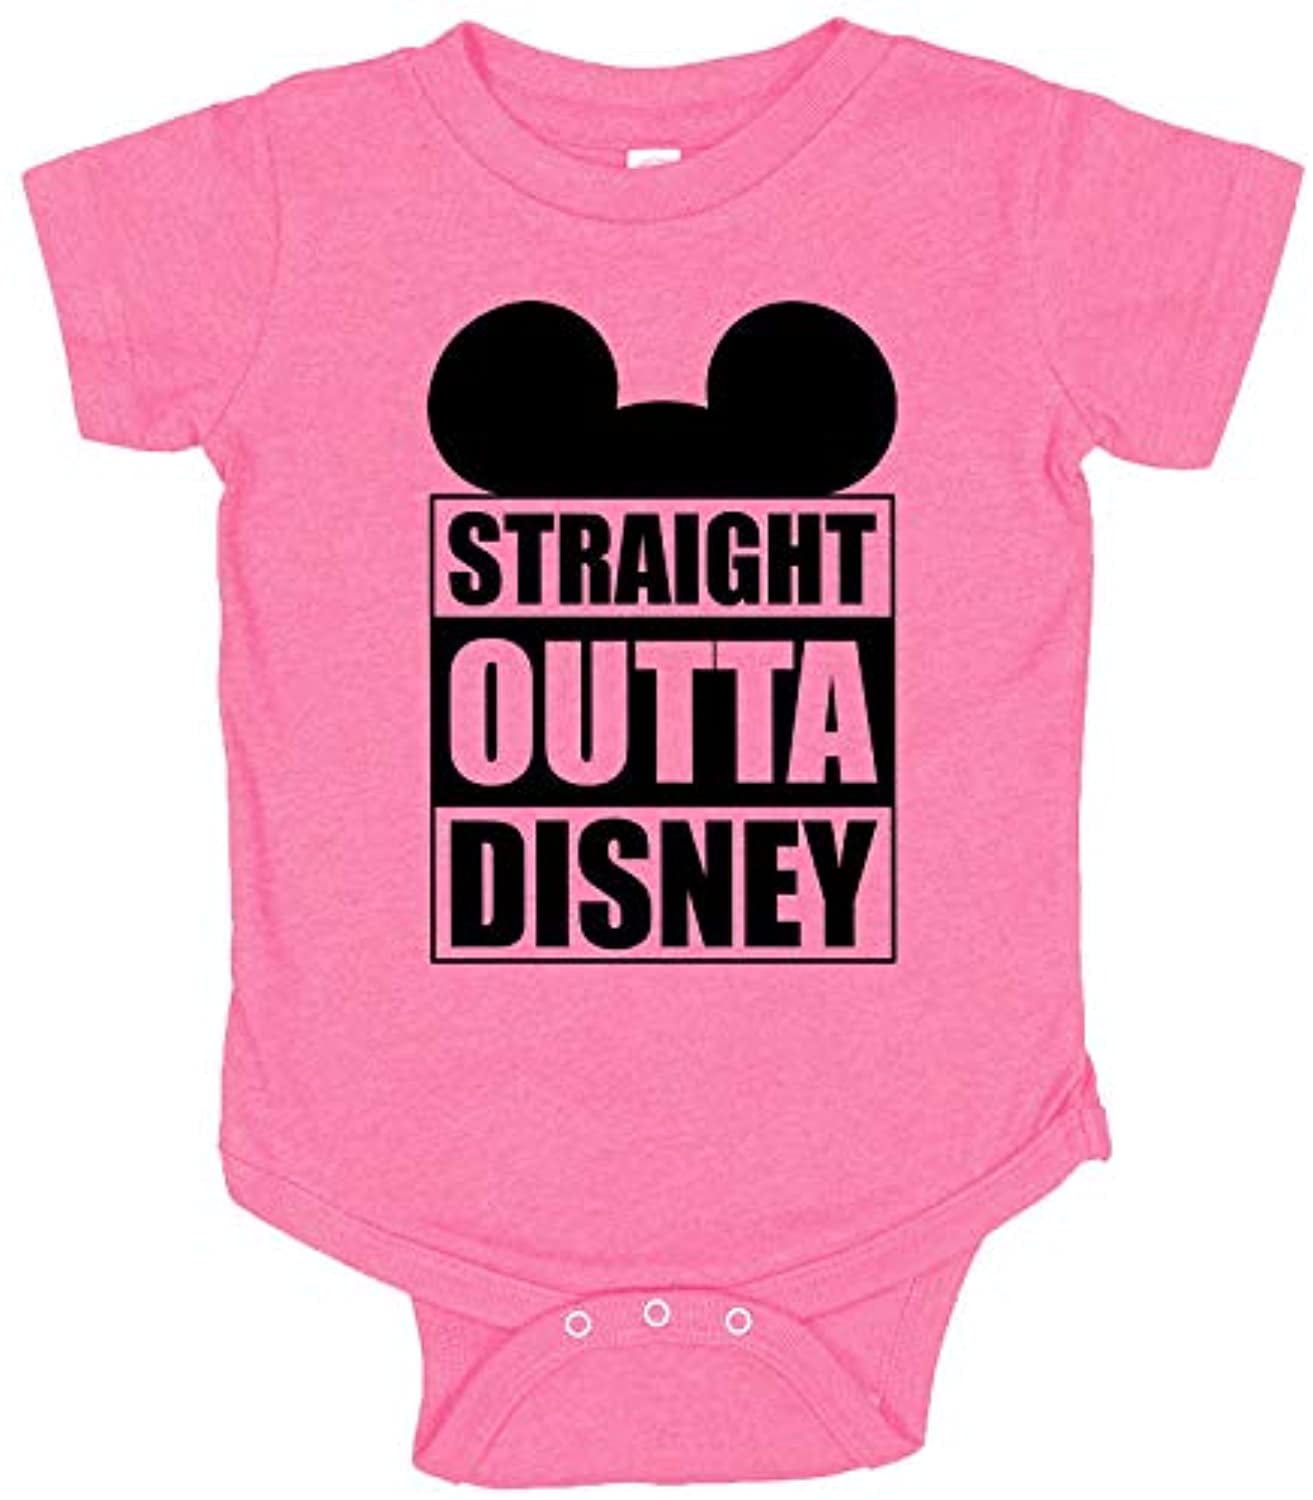 Disney Authentic Minnie Mouse Halloween Baby Bodysuit Size 3 6 9 12 18 24 Months 